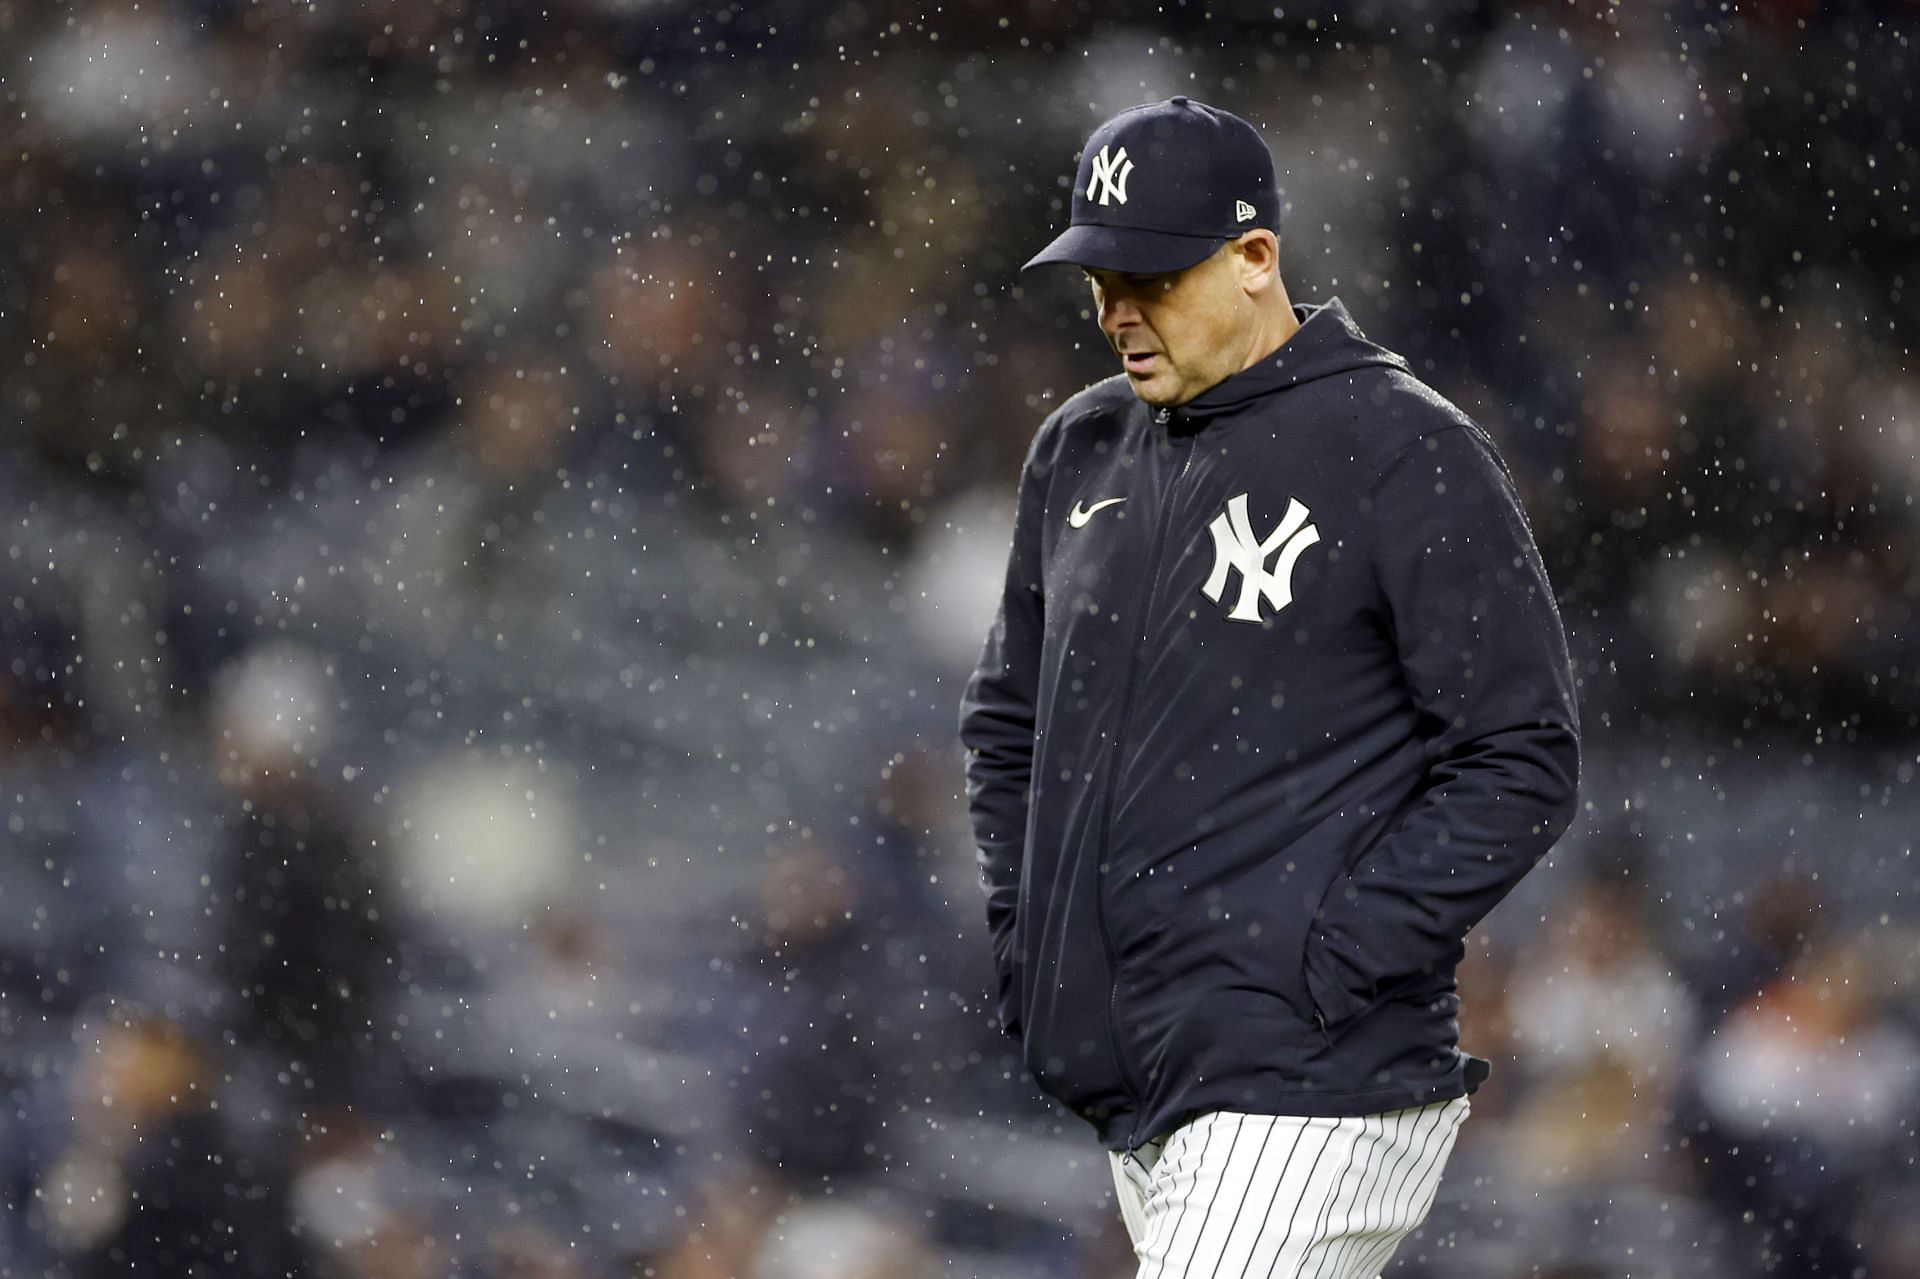 Aaron Boone also said he wants to stay out of the game.